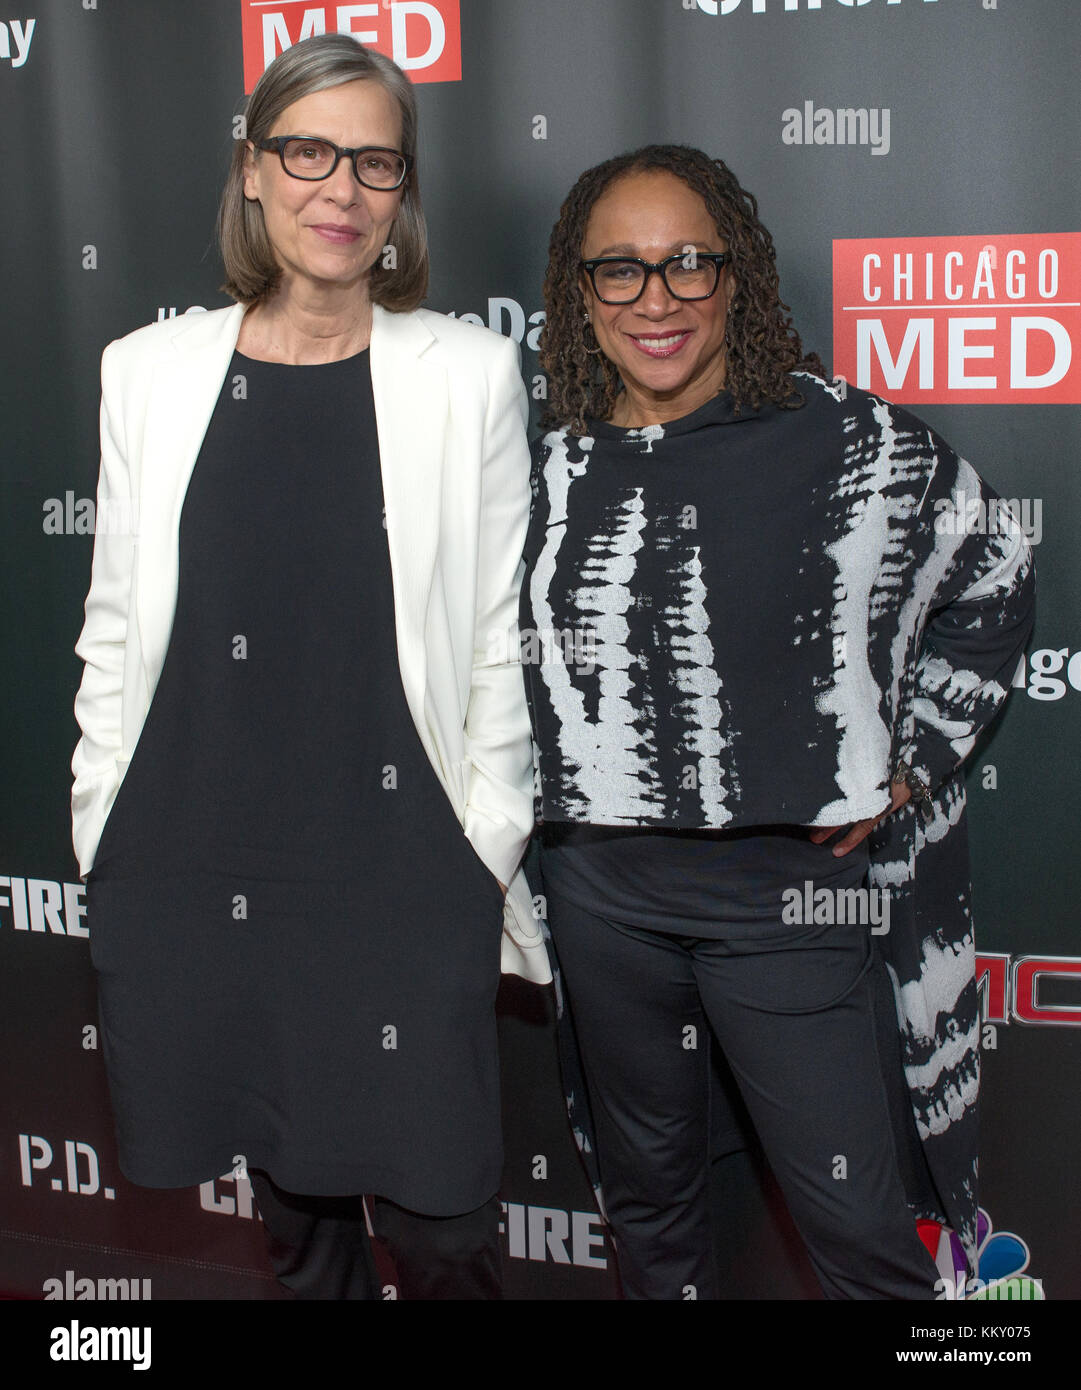 3rd annual NBC One Chicago Party featuring cast members from Chicago Fire, Chicago Med and Chicago P.D - Arrivals  Featuring: Amy Morton, S. Epatha Merkerson Where: Chicago, Illinois, United States When: 31 Oct 2017 Credit: WENN Stock Photo